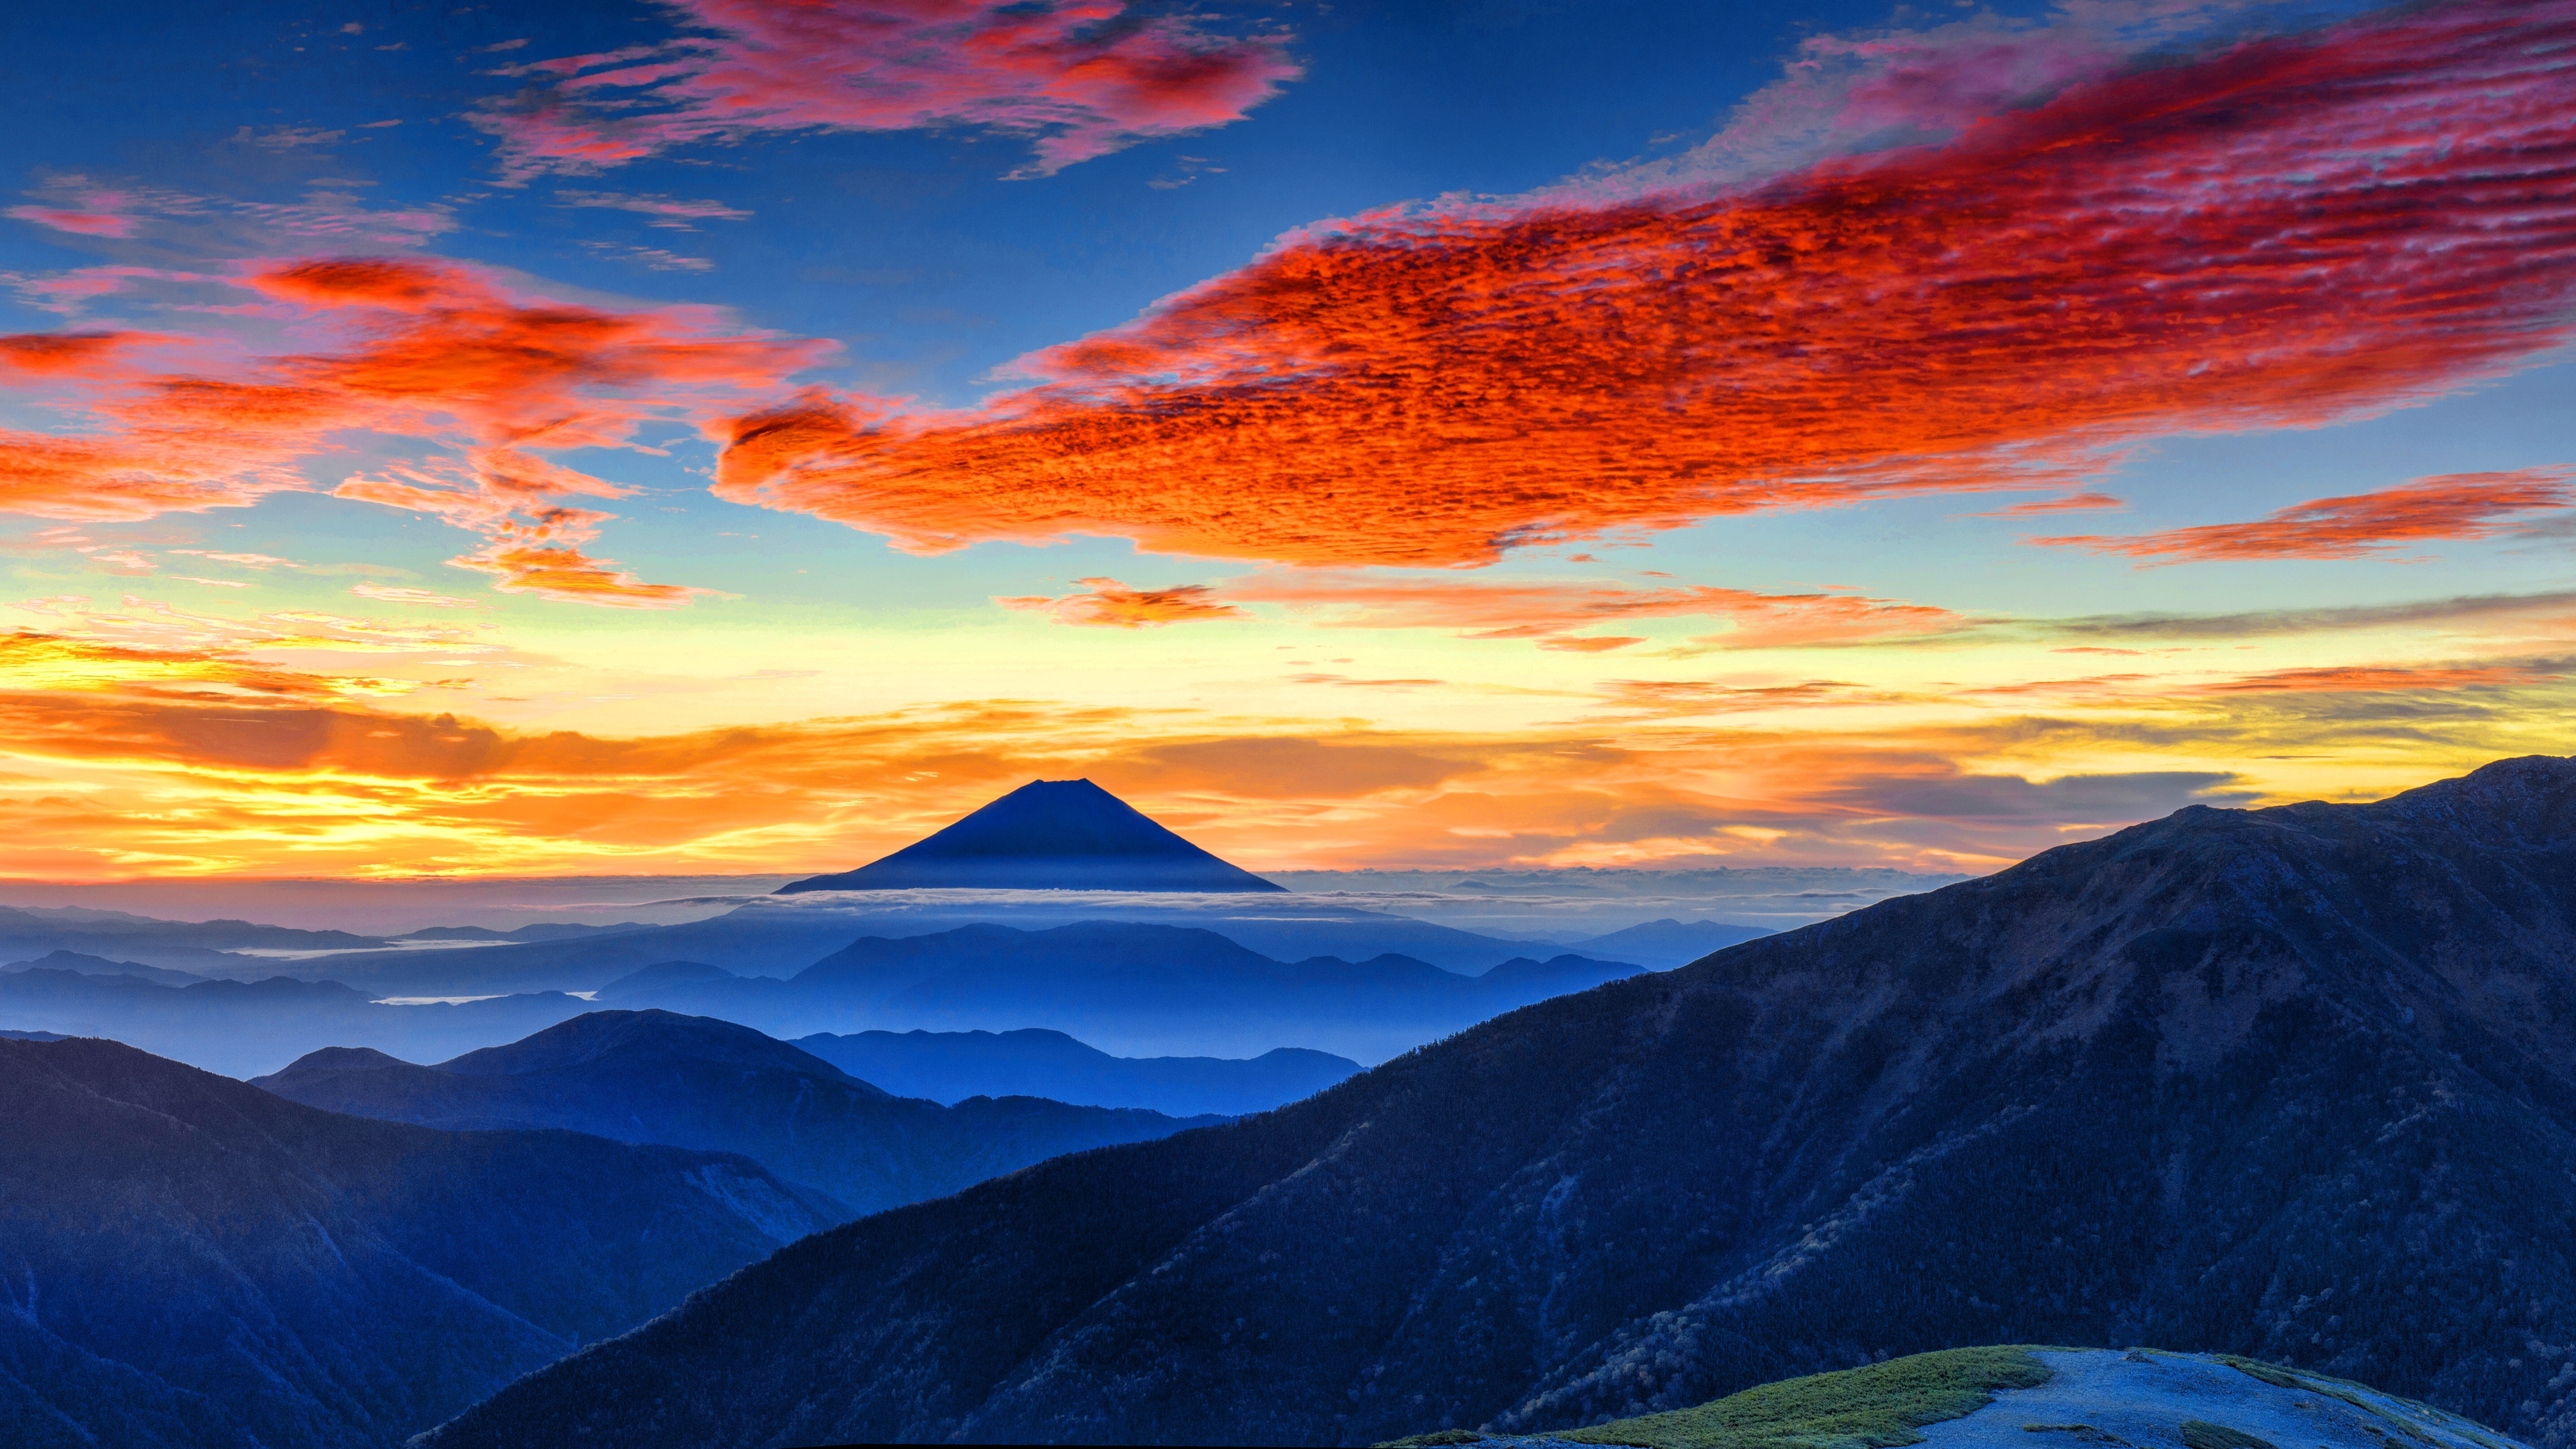 7680x4320 Mount Fuji Panaromic 8k 8k HD 4k Wallpapers, Image, Backgrounds, Photos and Pictures